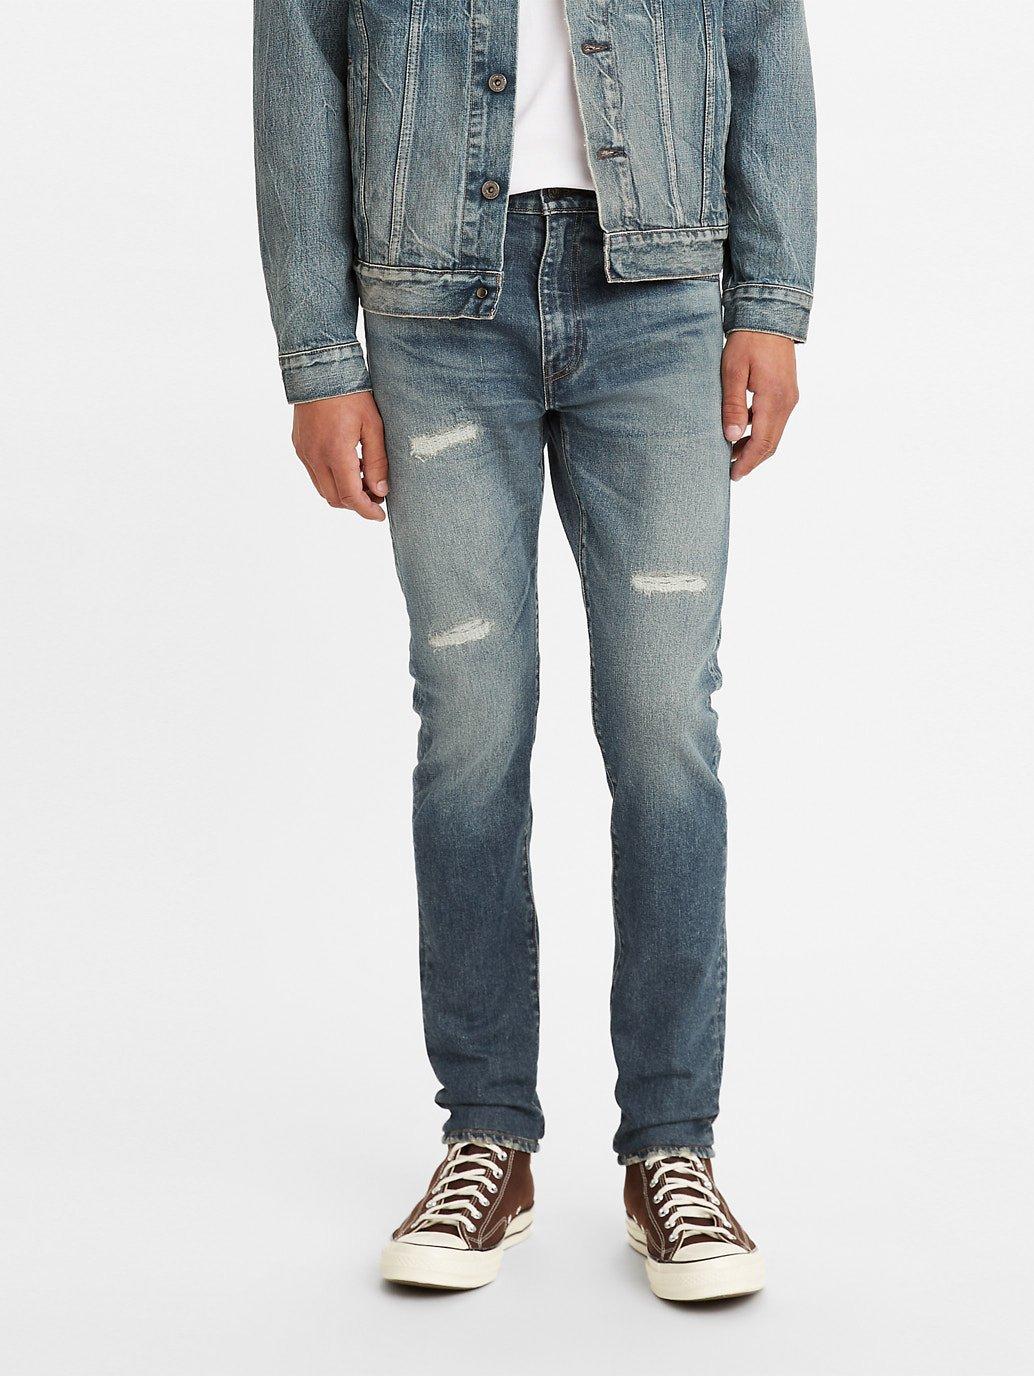 Buy Levi's® Made & Crafted® Men's 512™ Slim Taper Jeans | Levi’s ...